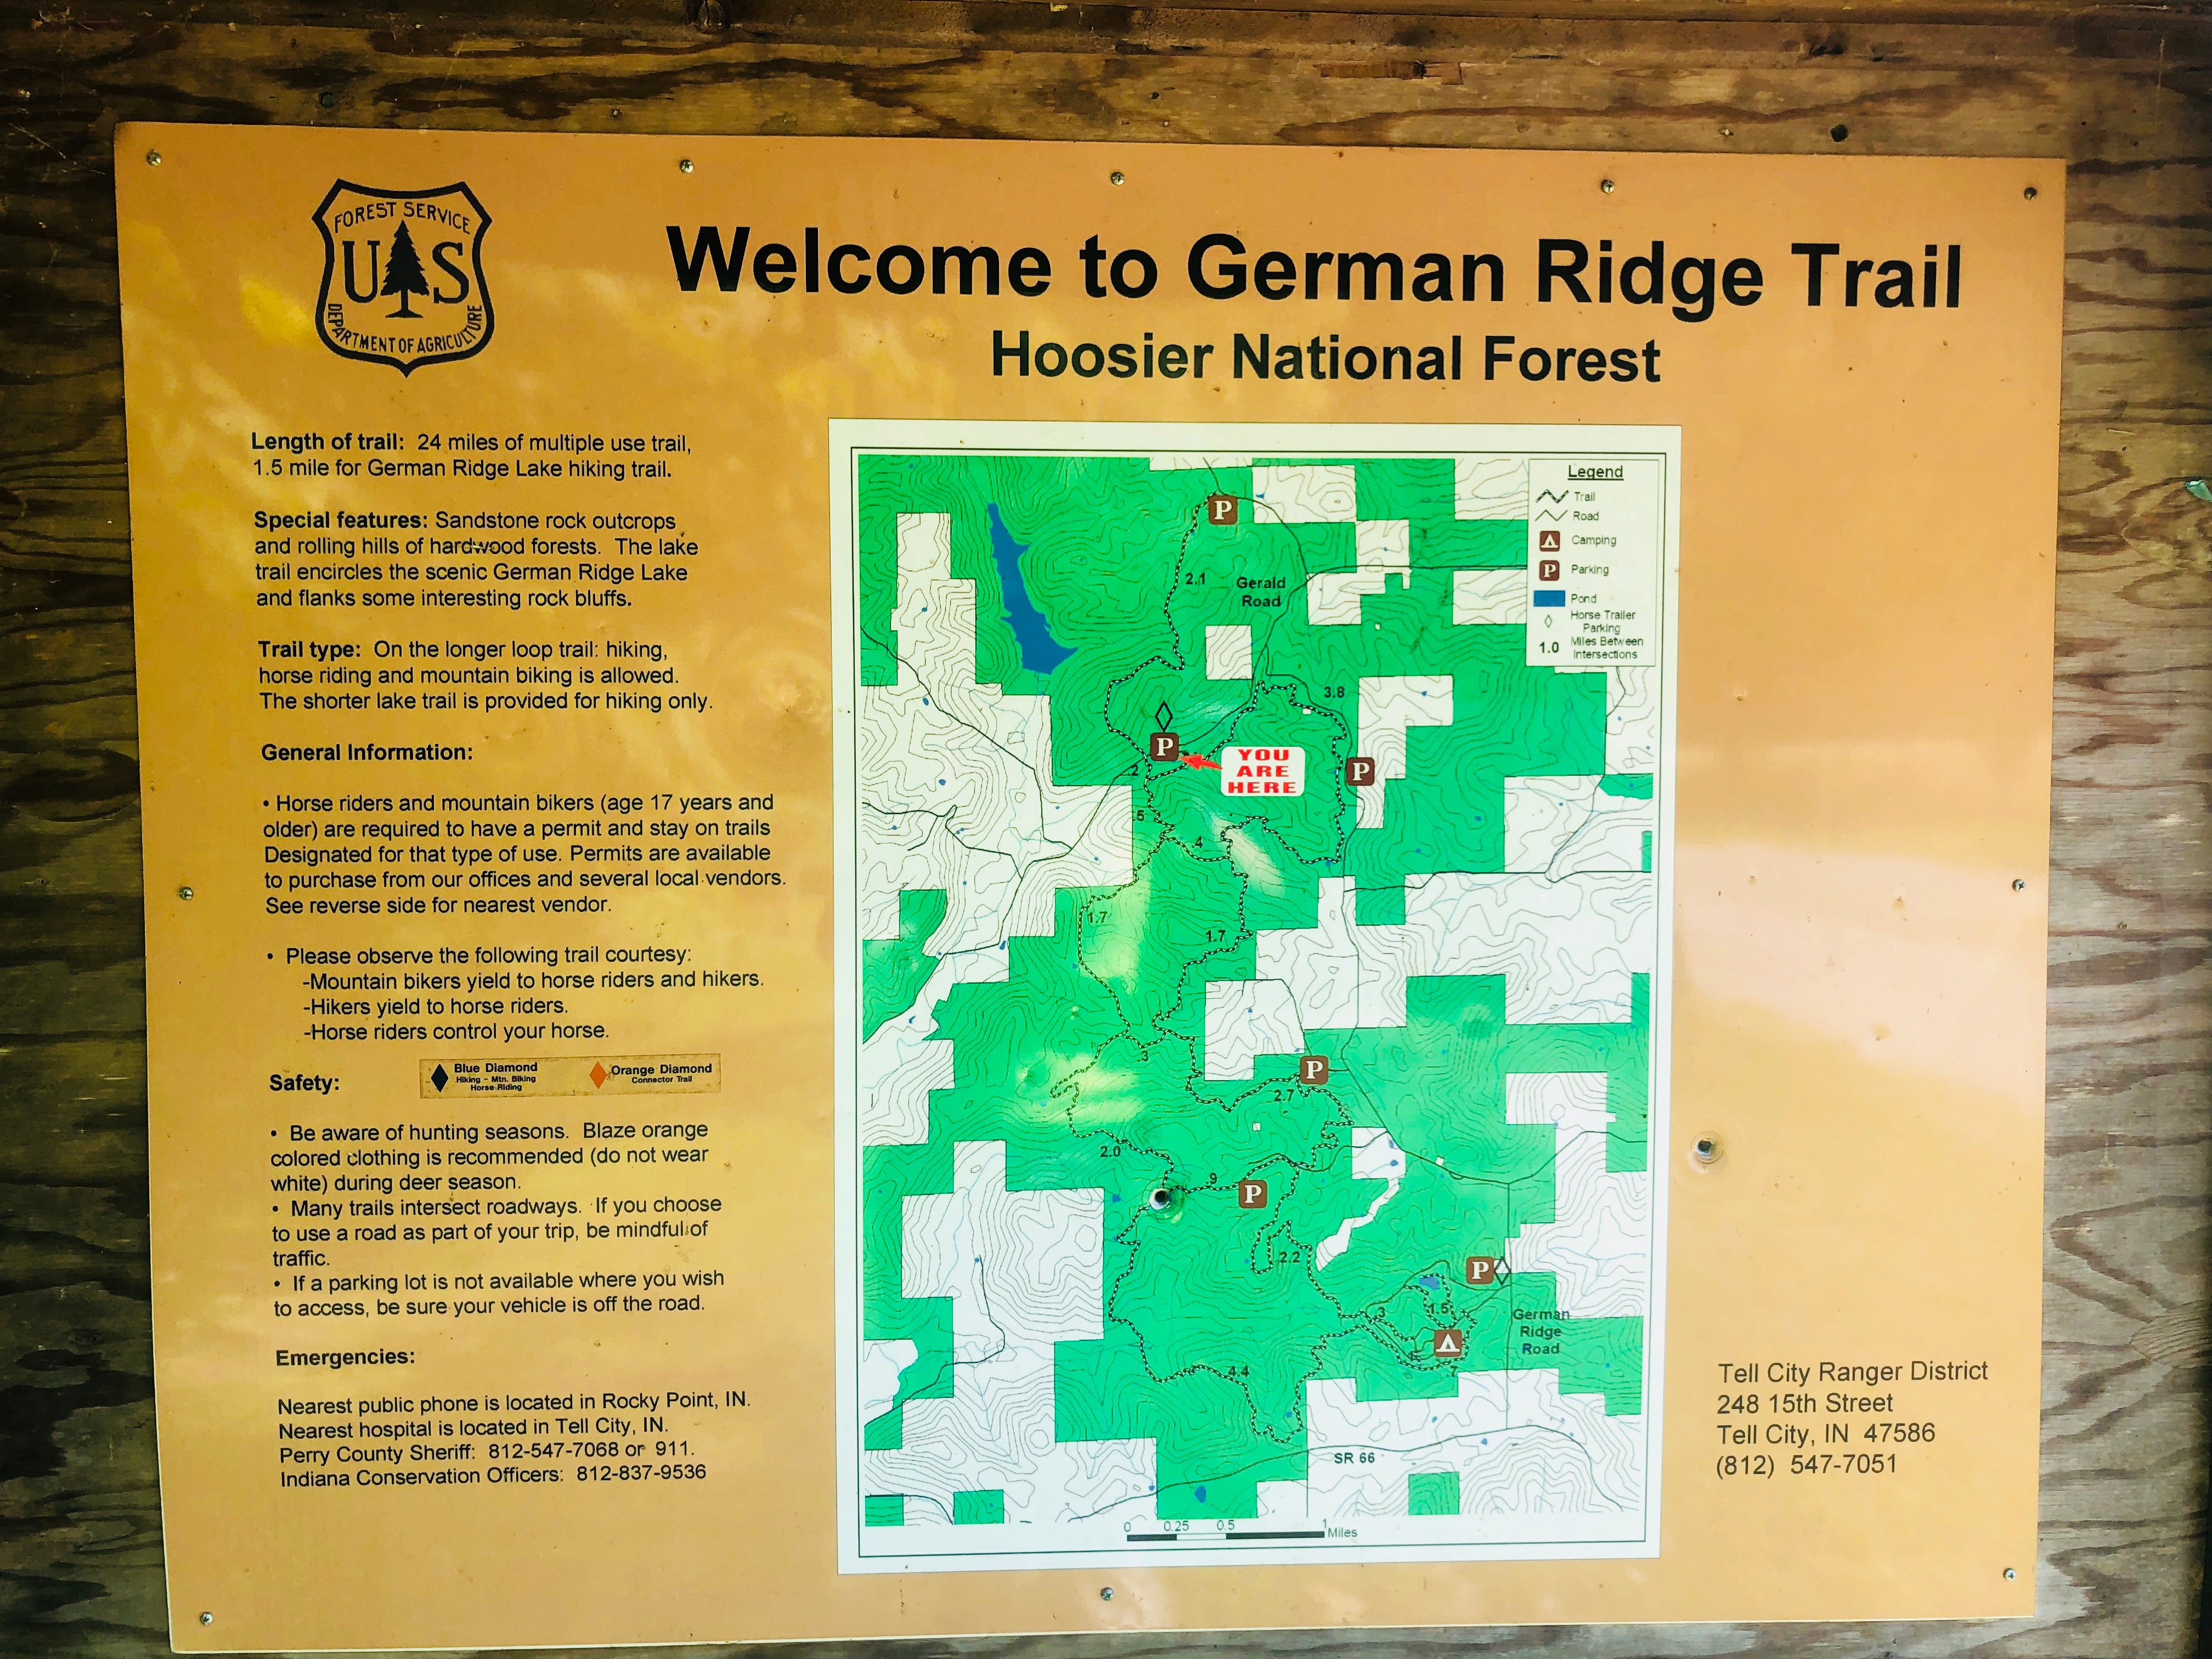 Camper submitted image from German Ridge Recreation Area - 5